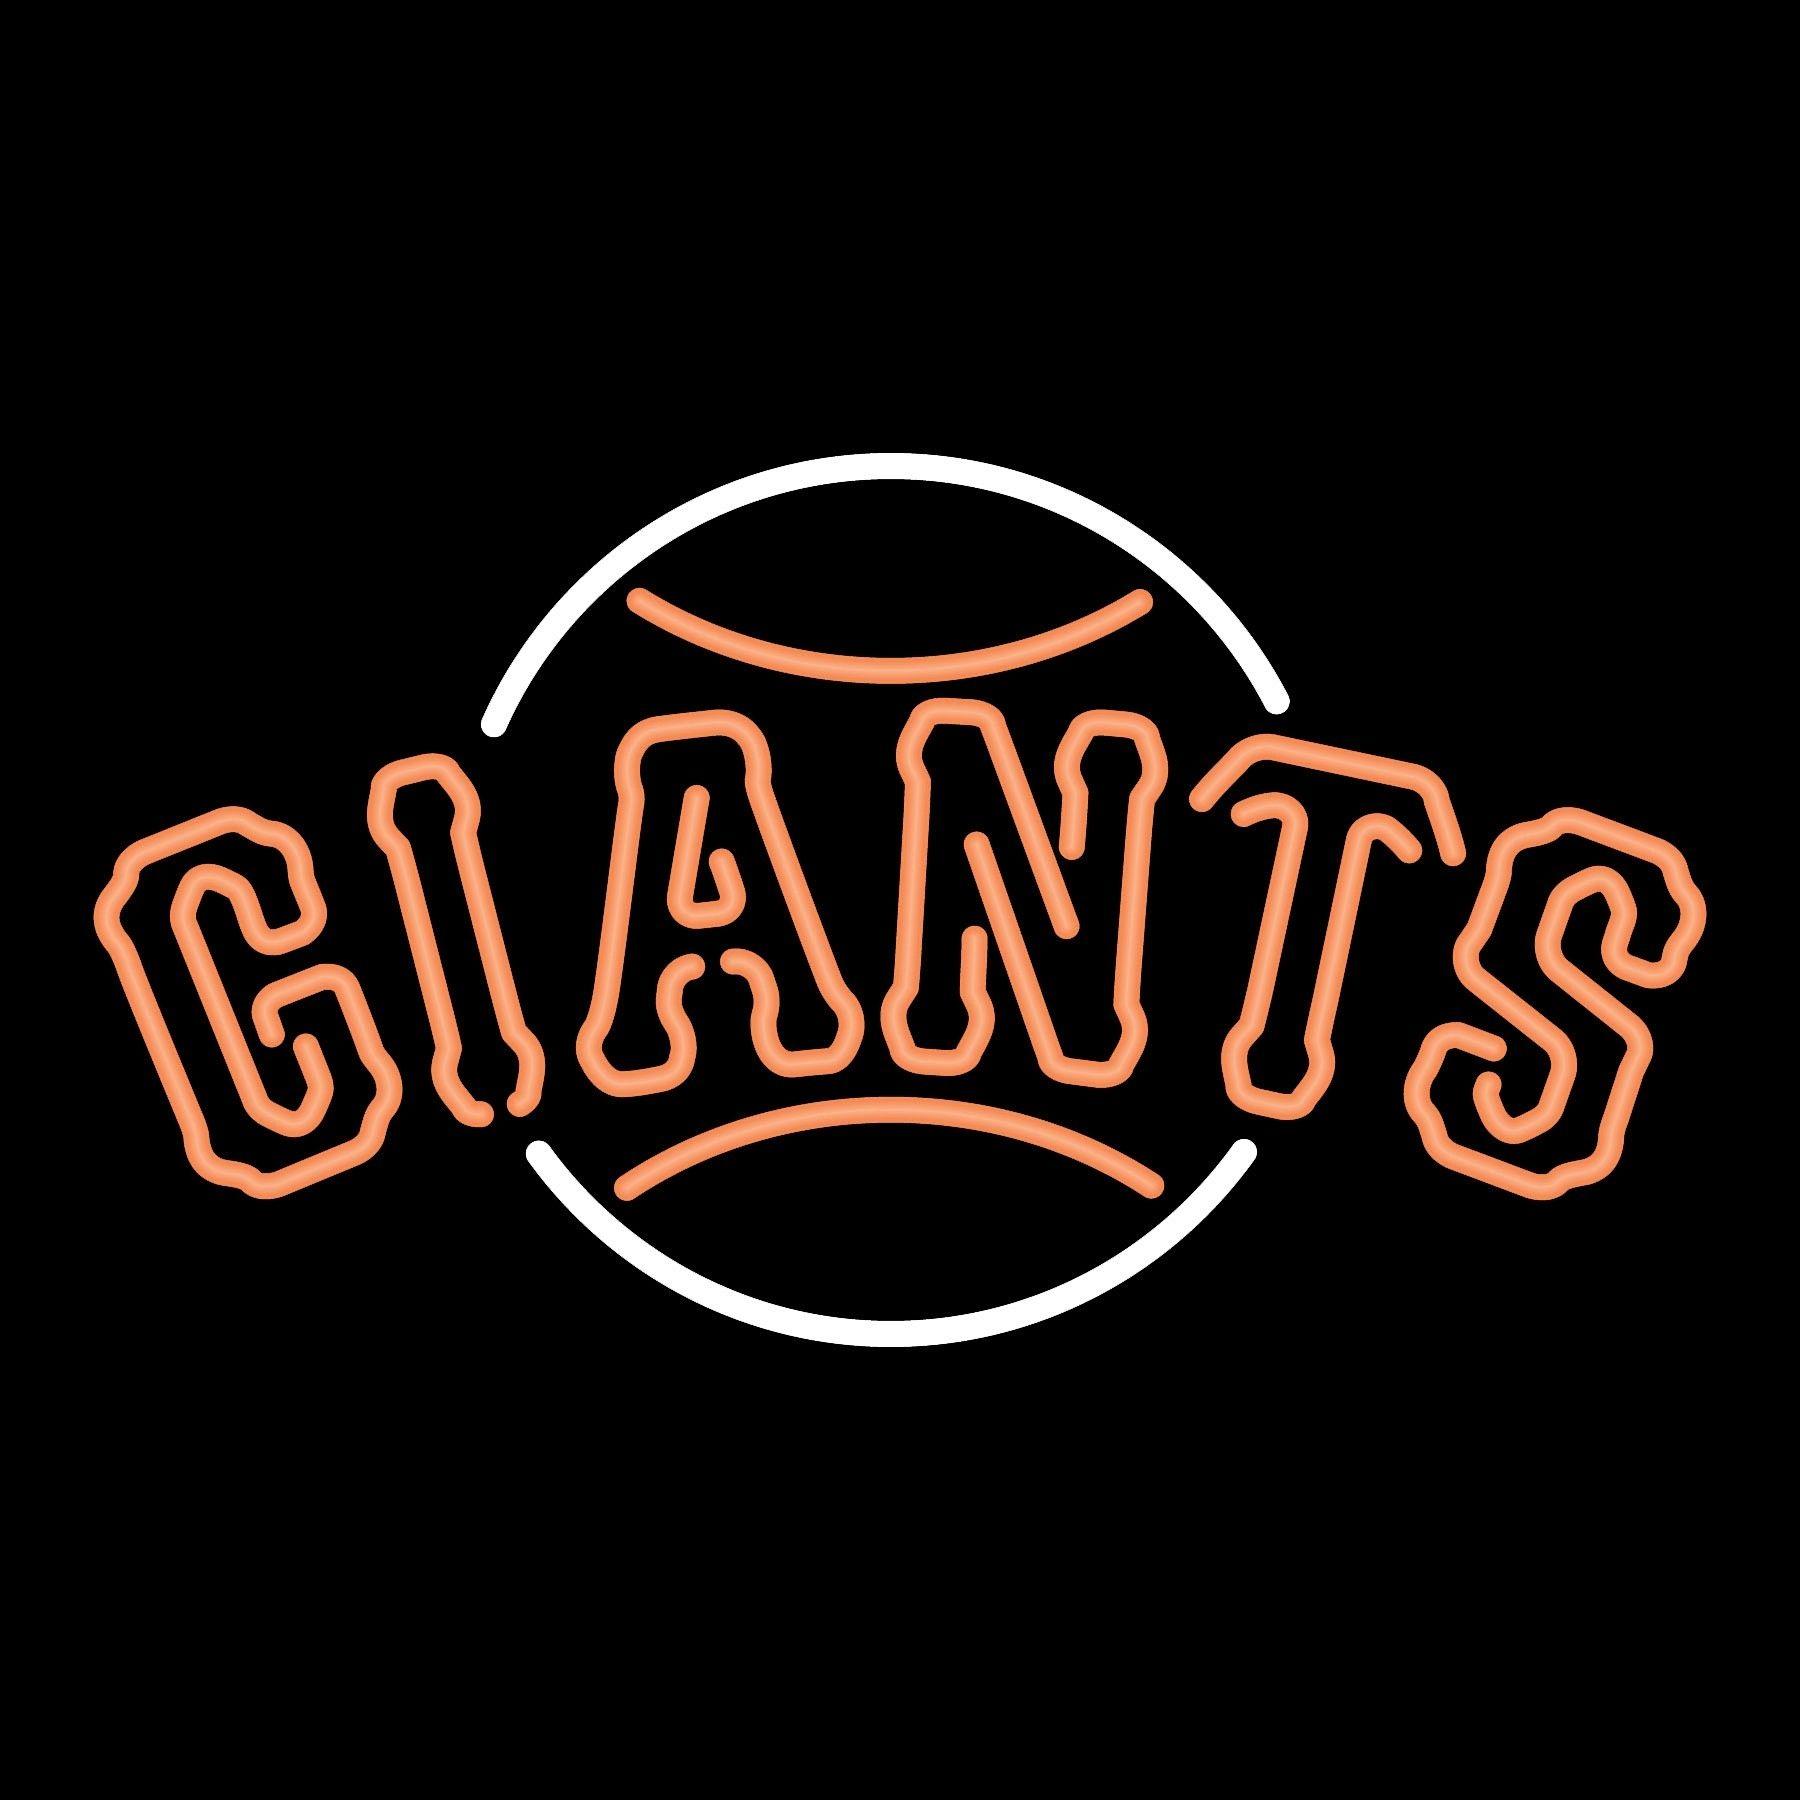 Most Popular Sf Giants iPhone Wallpaper FULL HD 1080p For PC